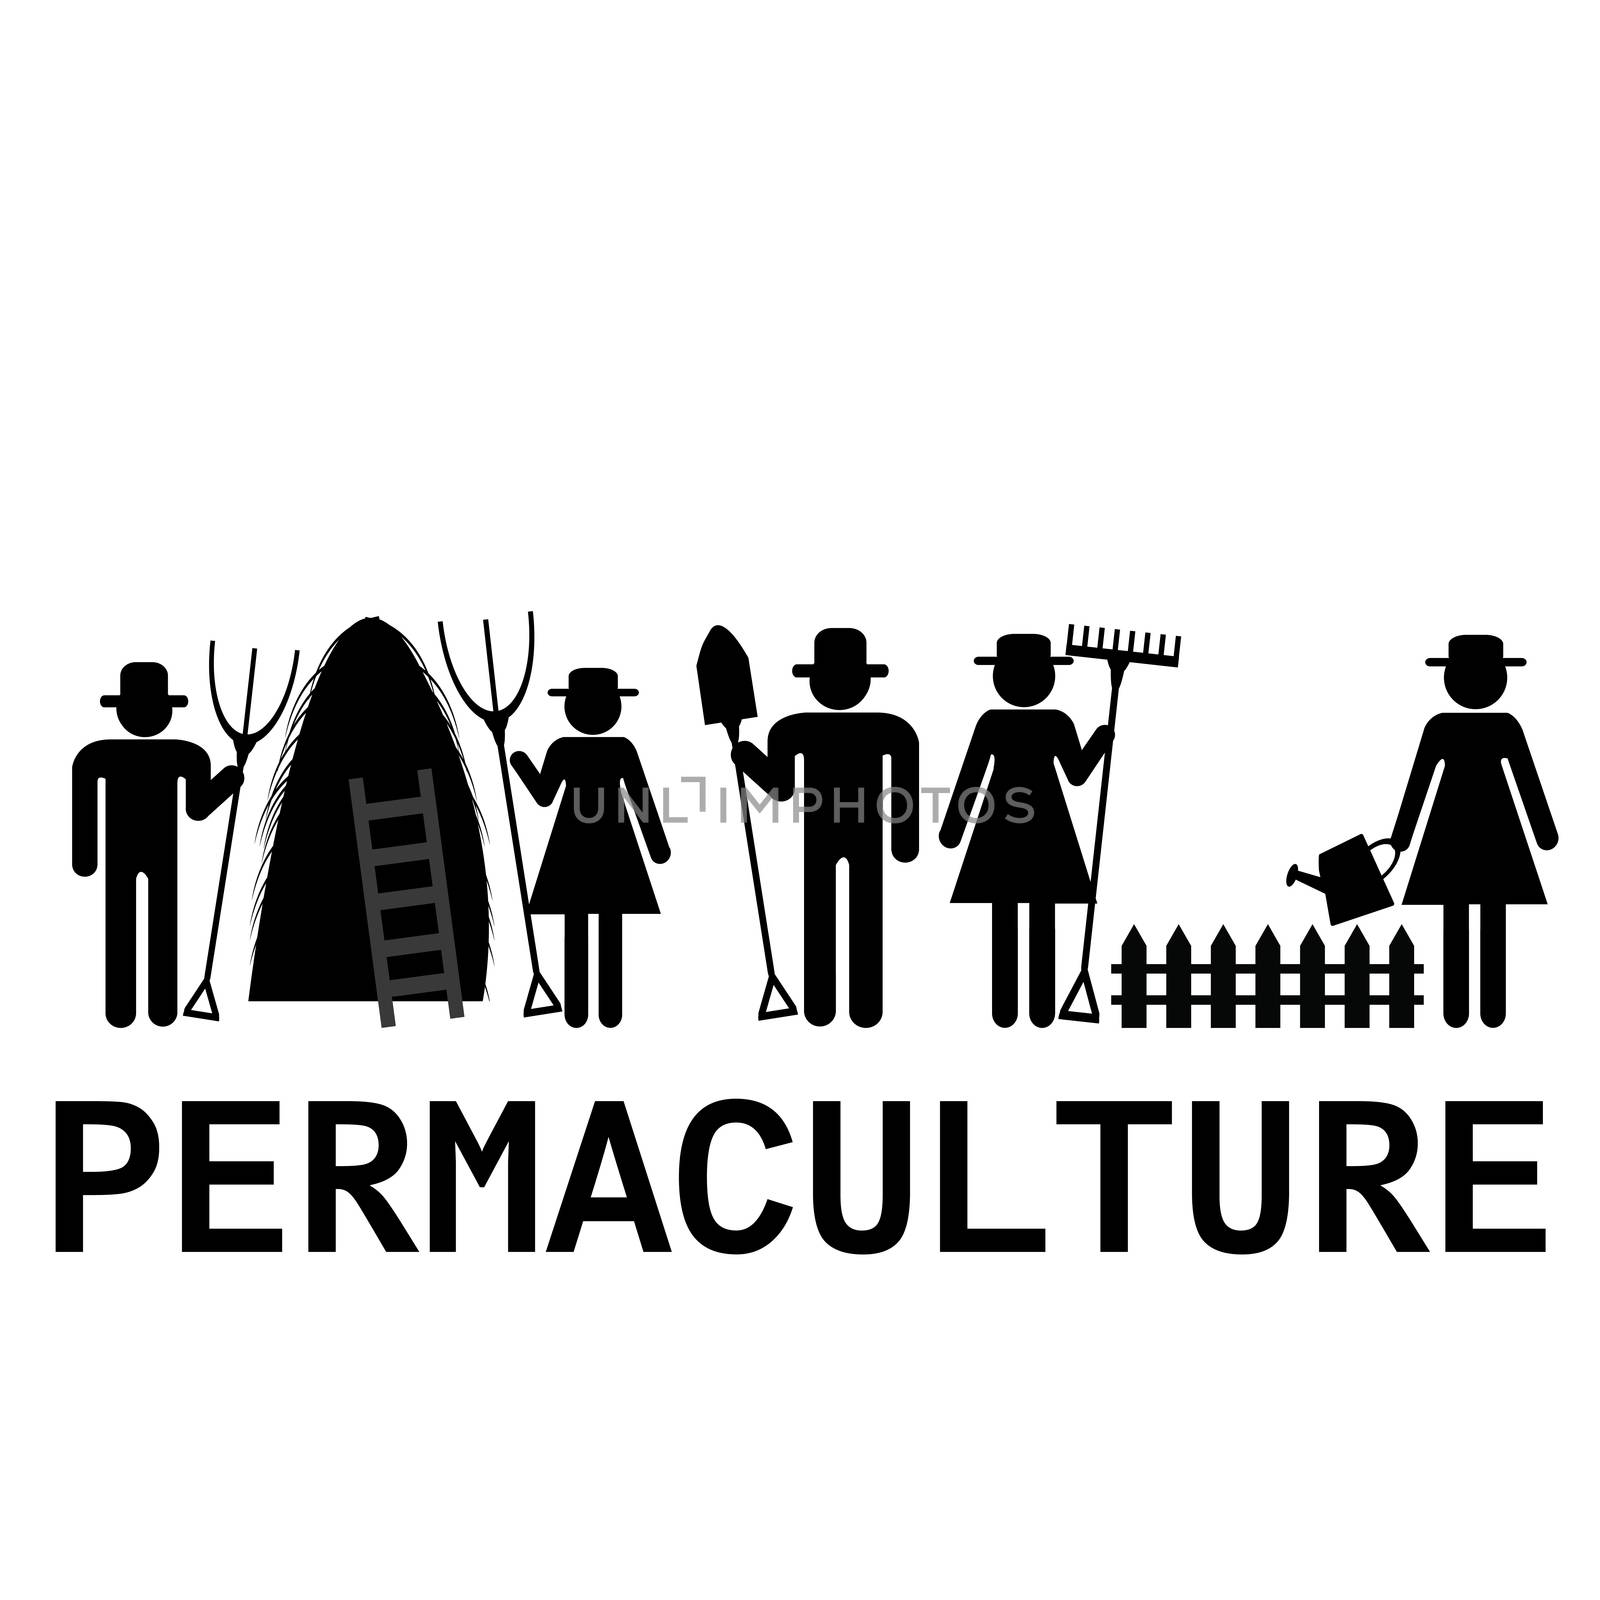 Permaculture concept with farmers using agricultural tools by hibrida13